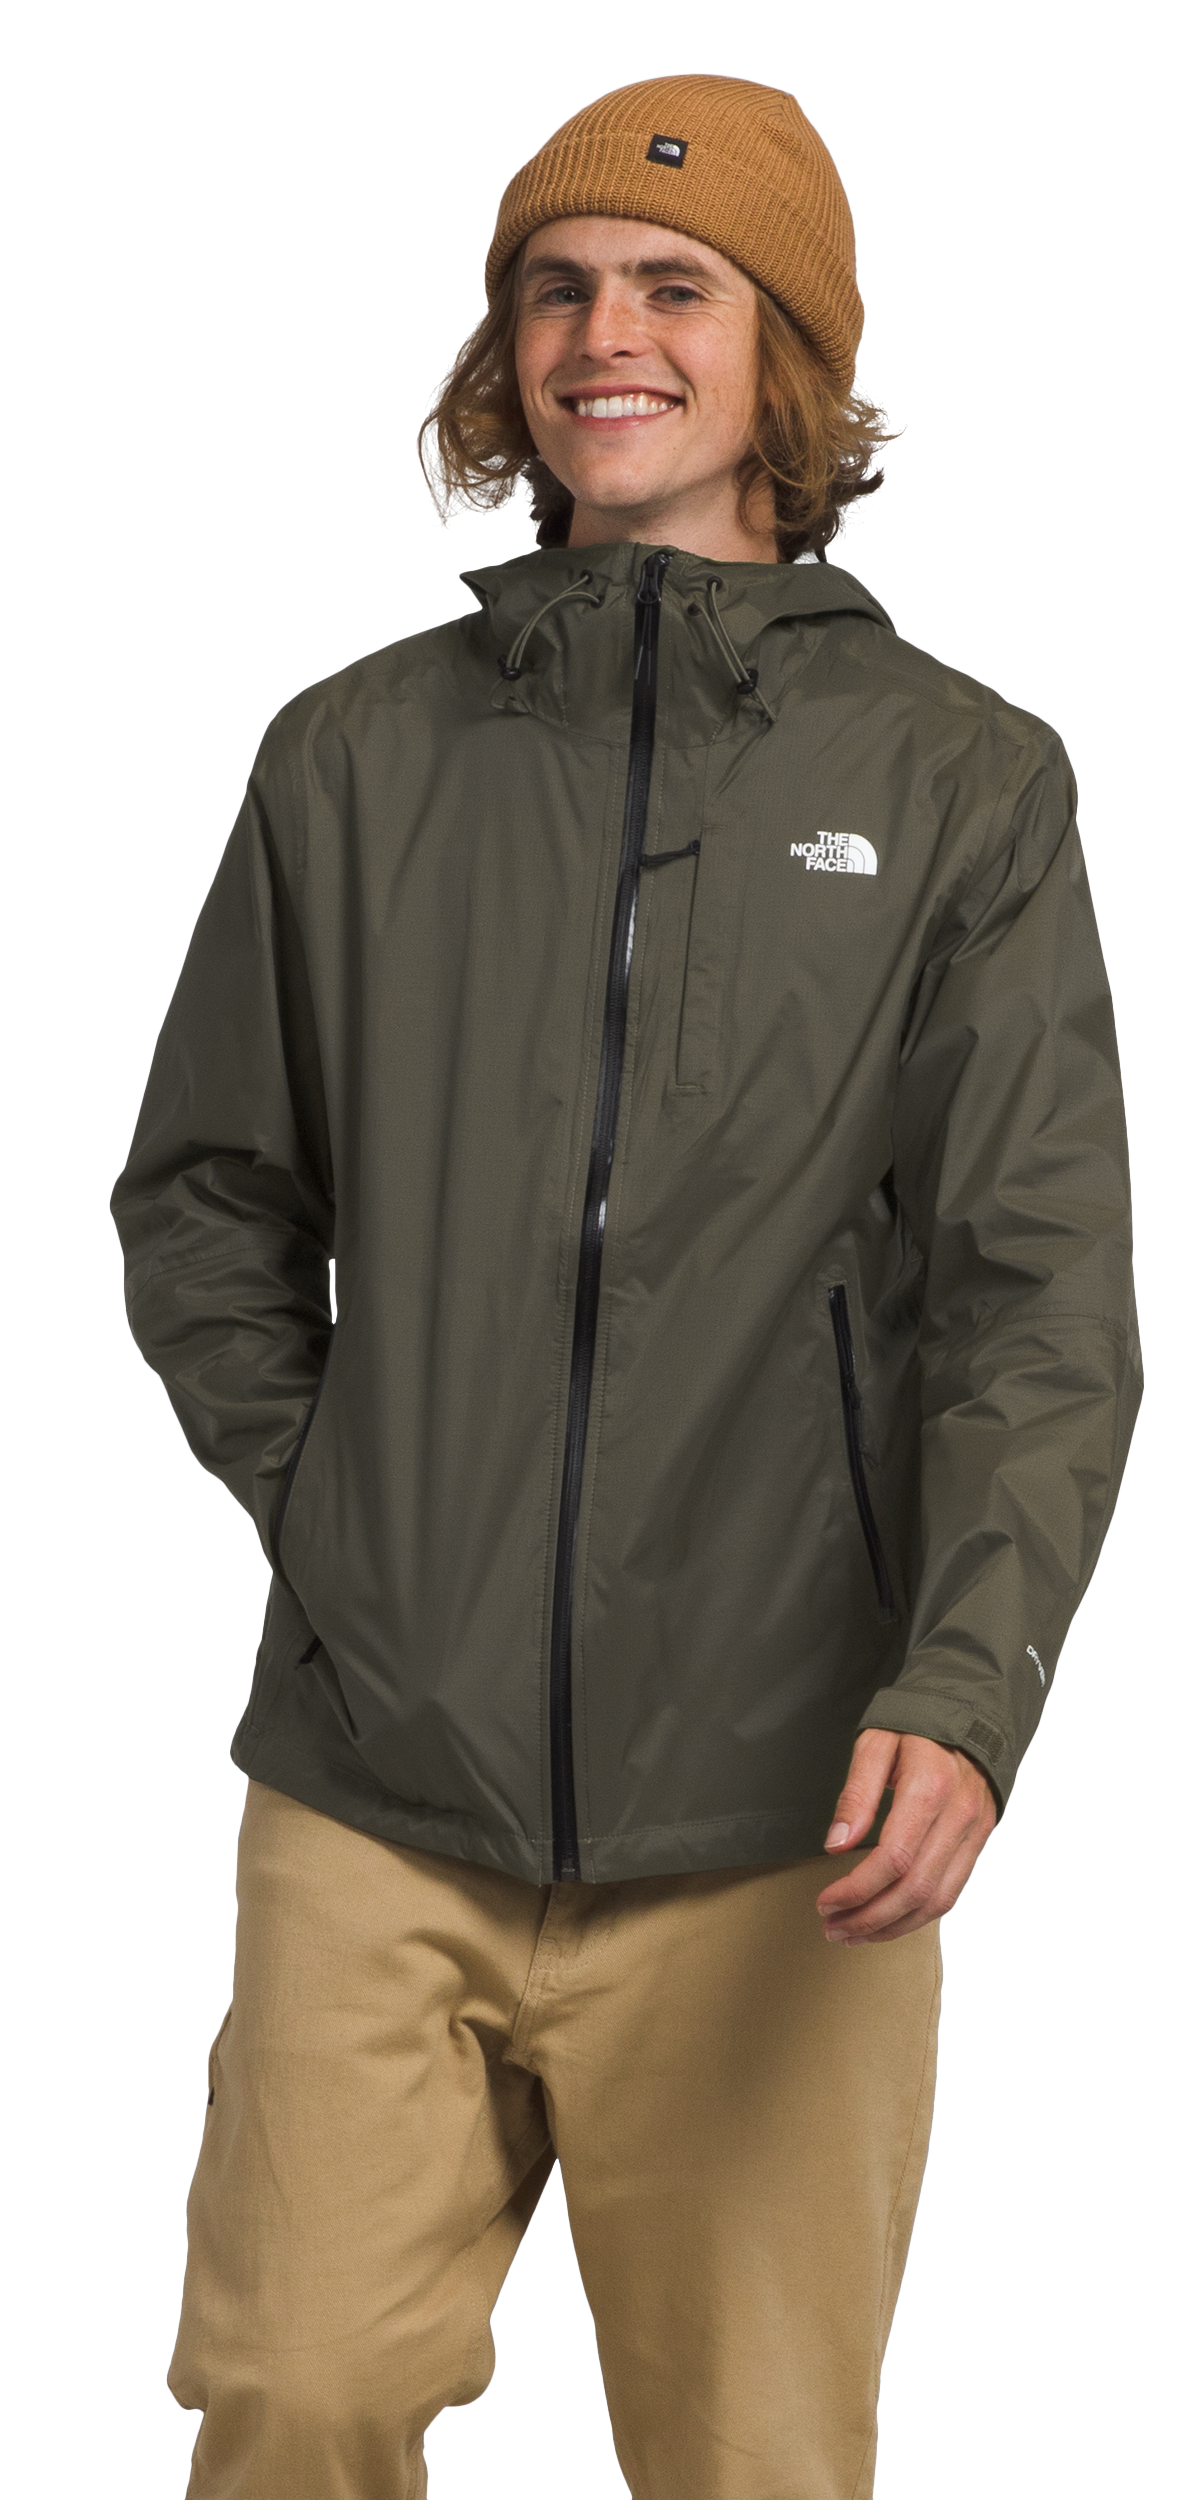 The North Face Alta Vista Jacket for Men - New Taupe Green - 2XL